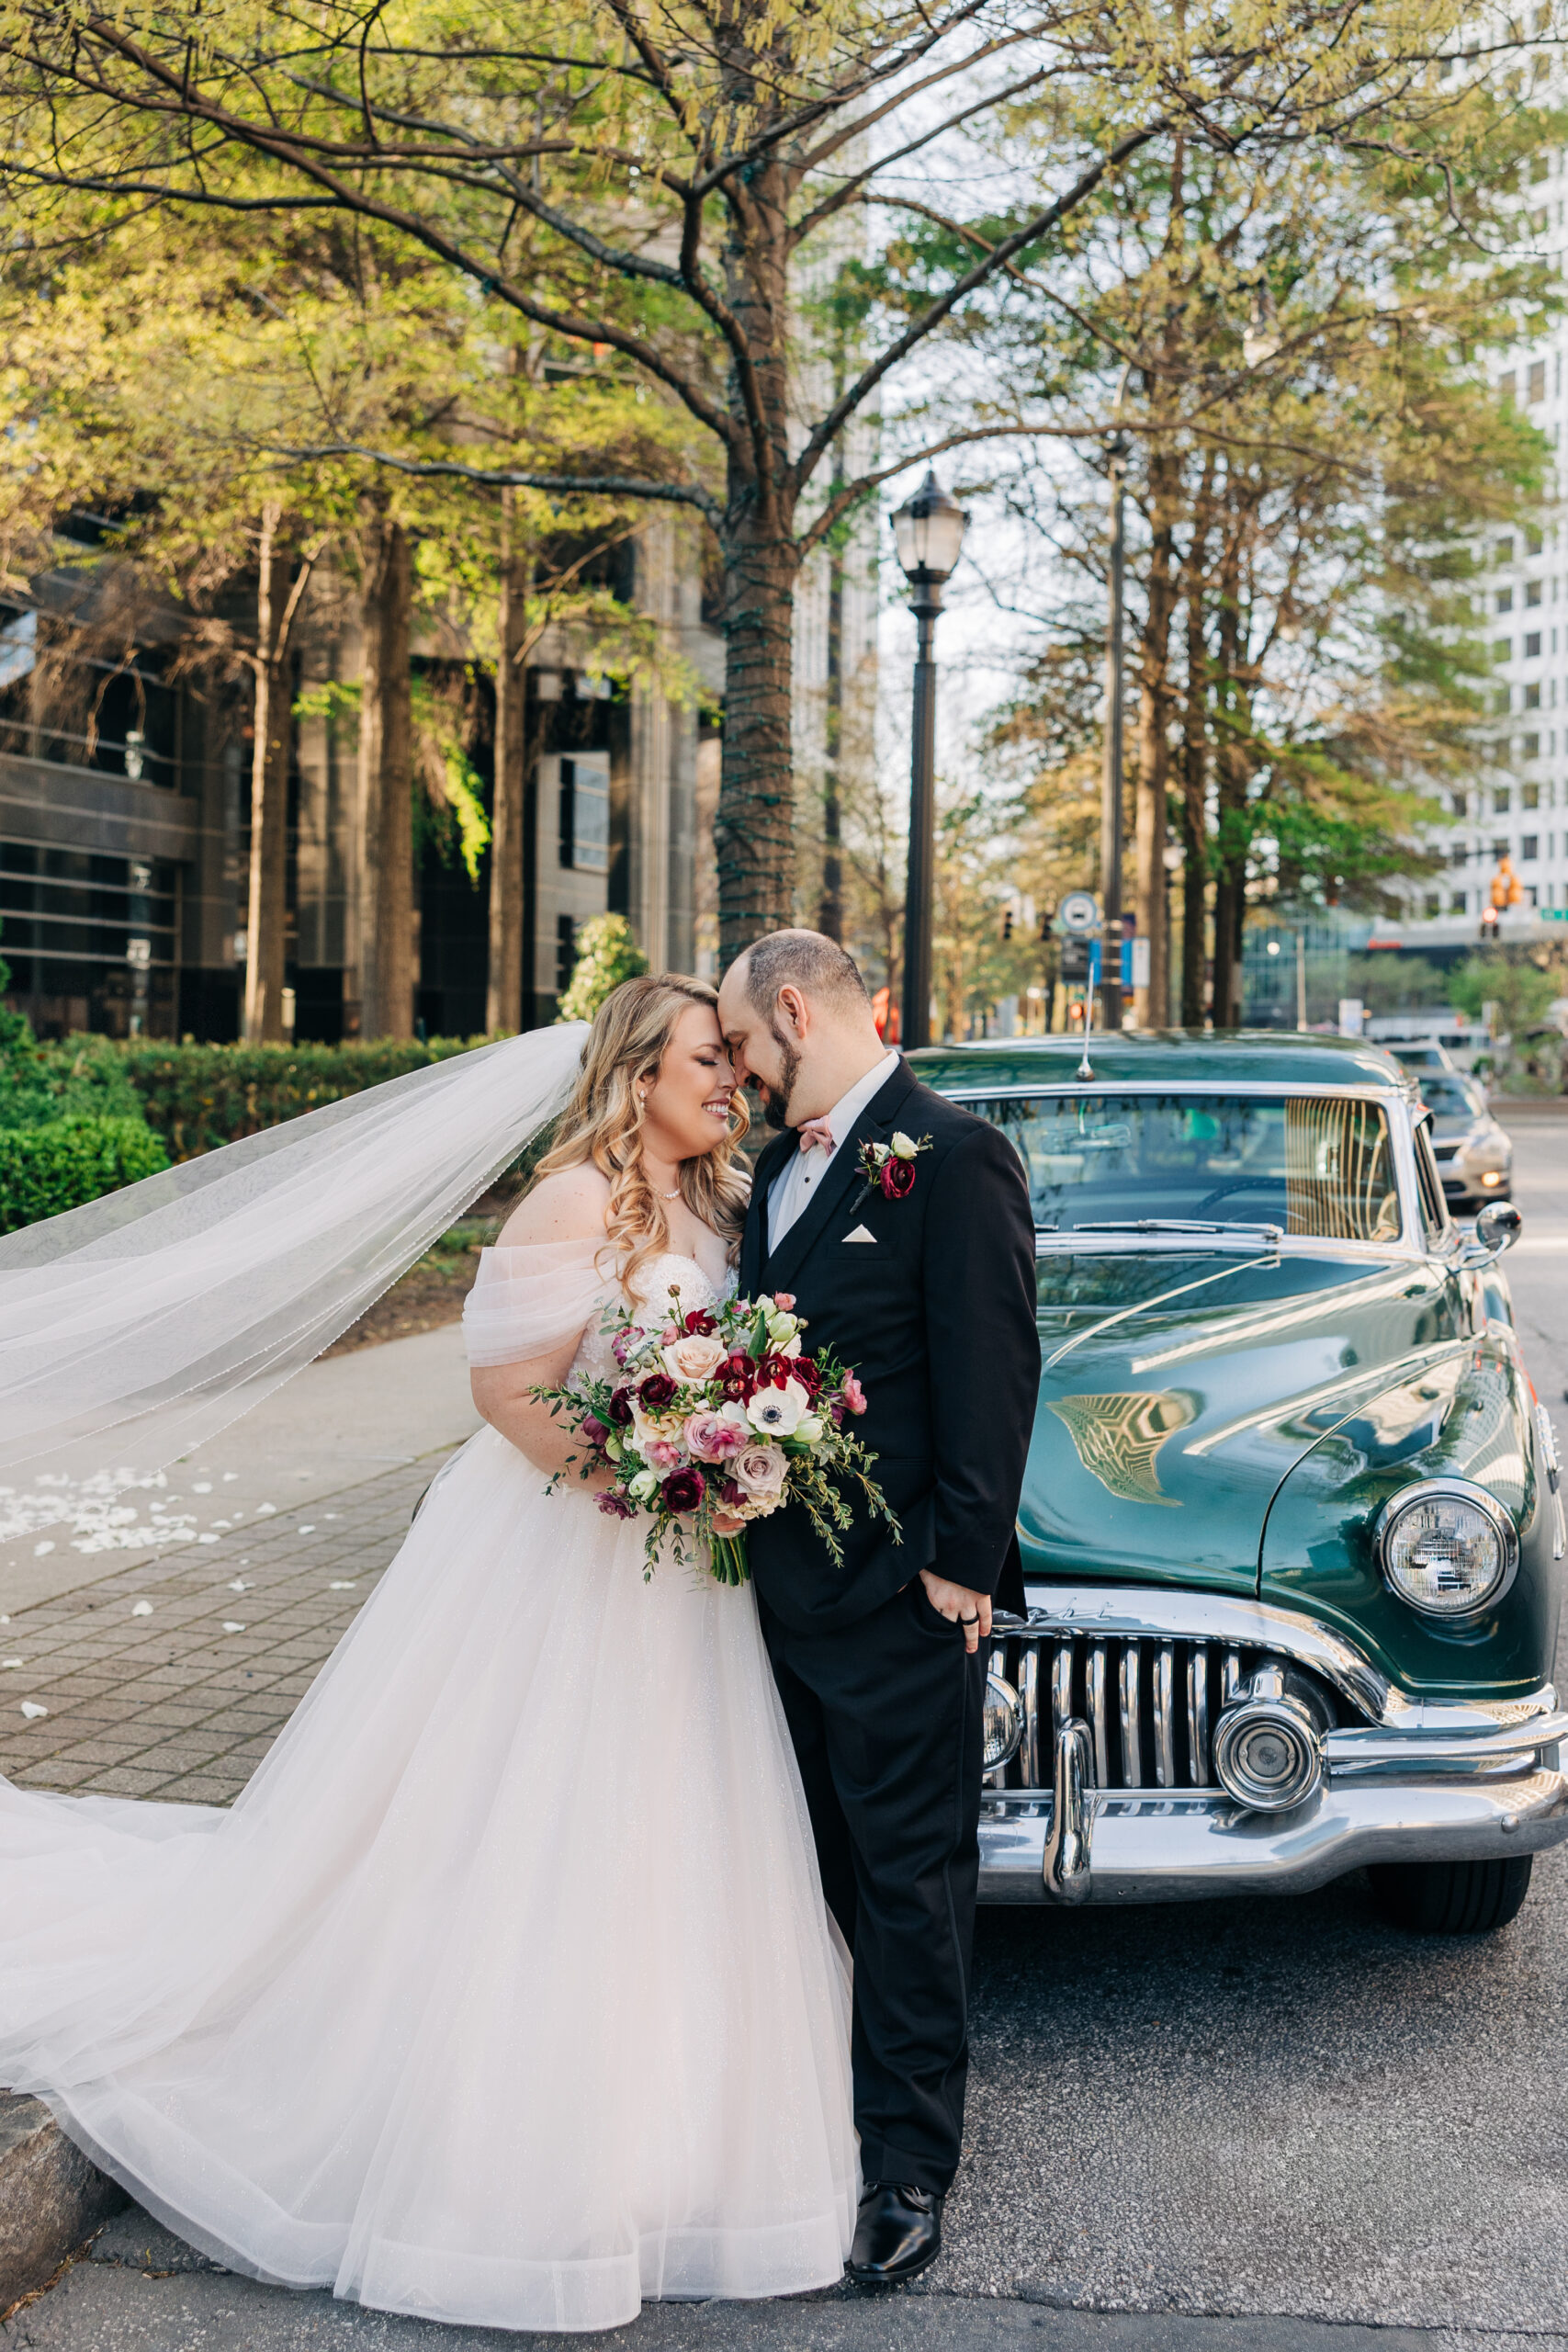 Newlyweds stand on the street in front of the Wimbish House wedding venue and a vintage green car while touching foreheads